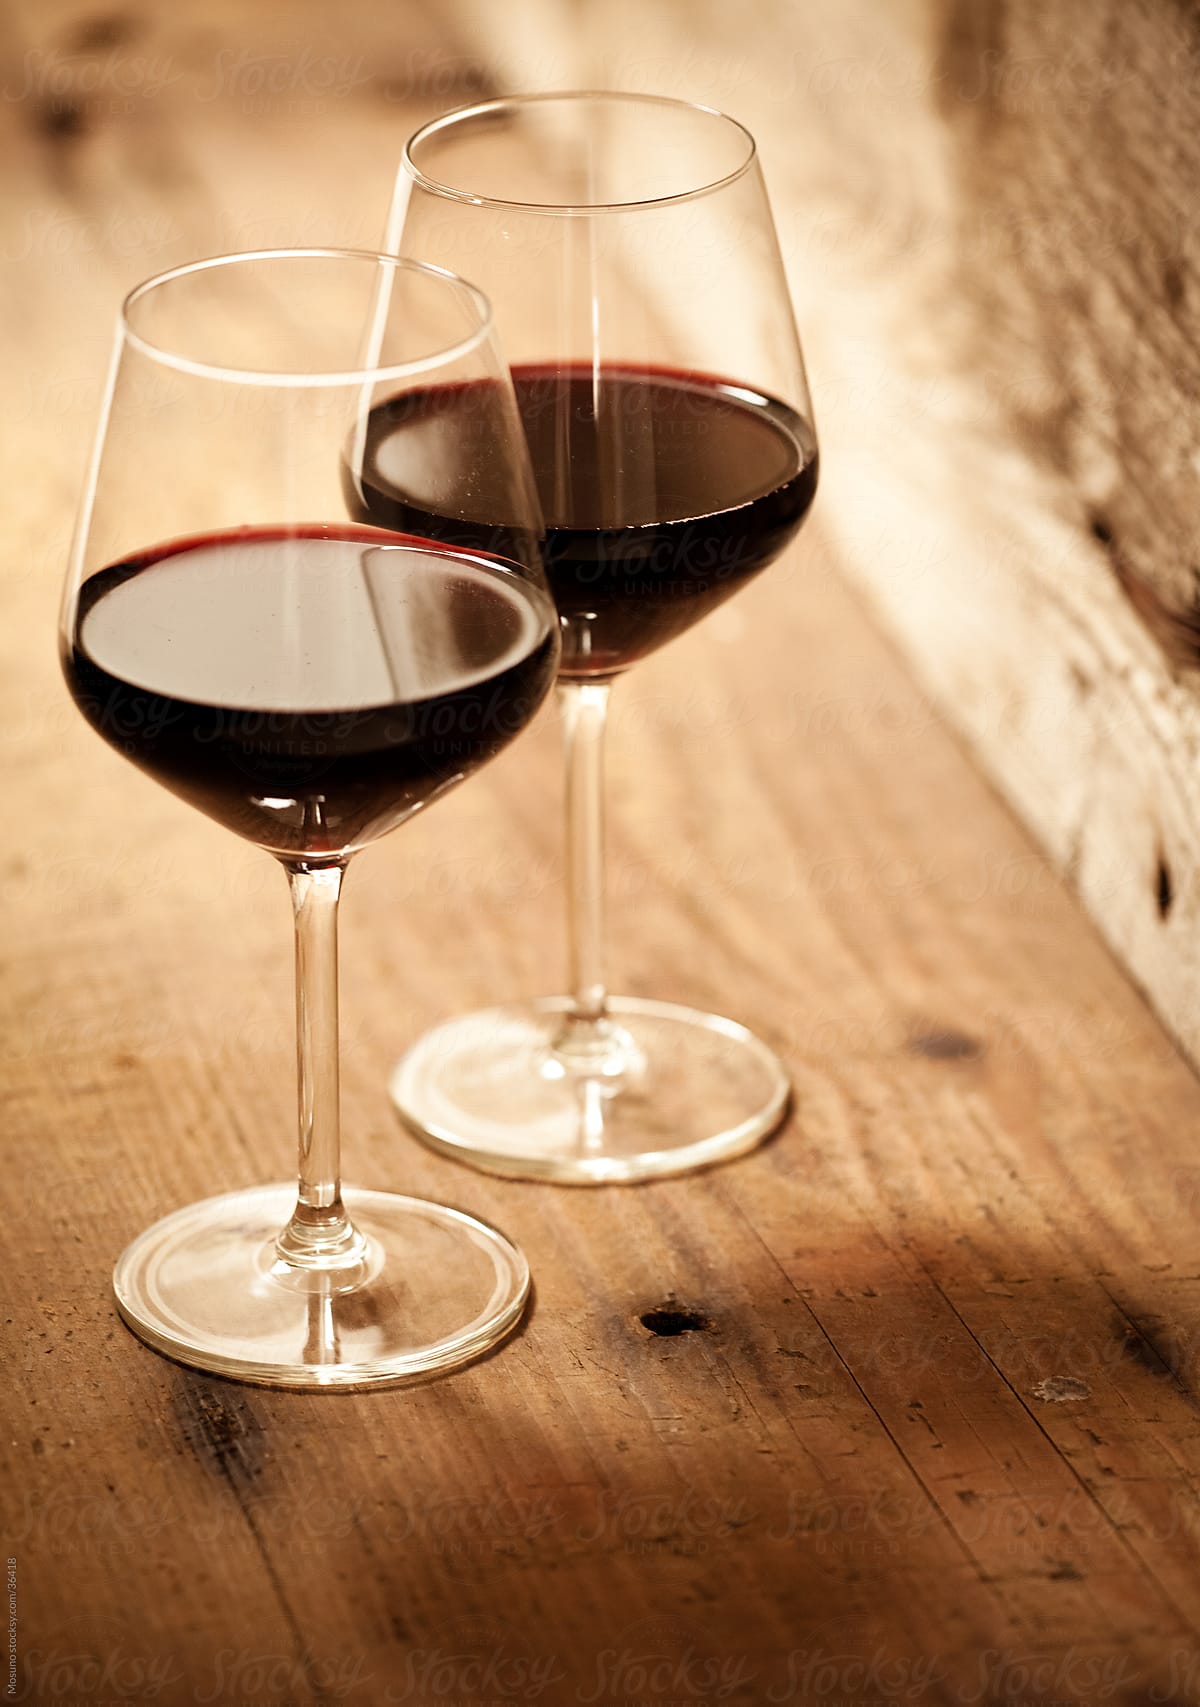 Glasses Of Red Wine On A Wooden Table." by Stocksy Contributor "Mosuno" - Stocksy